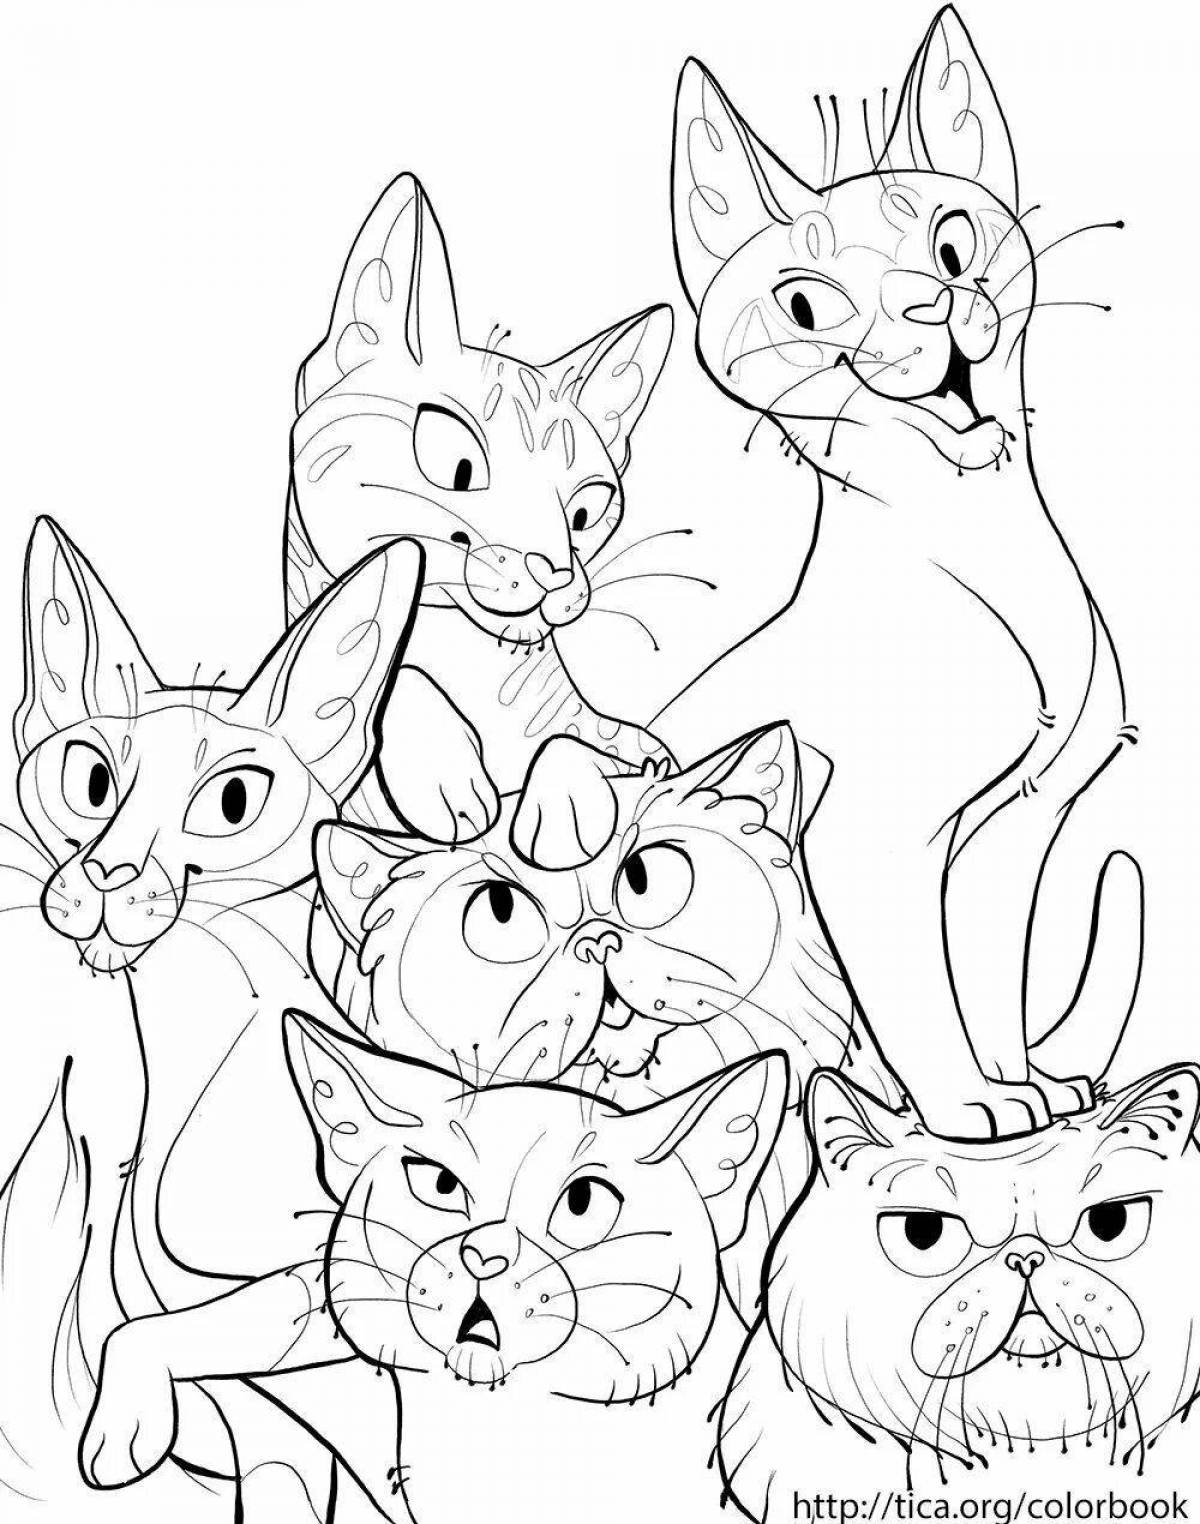 Colouring bright cat family